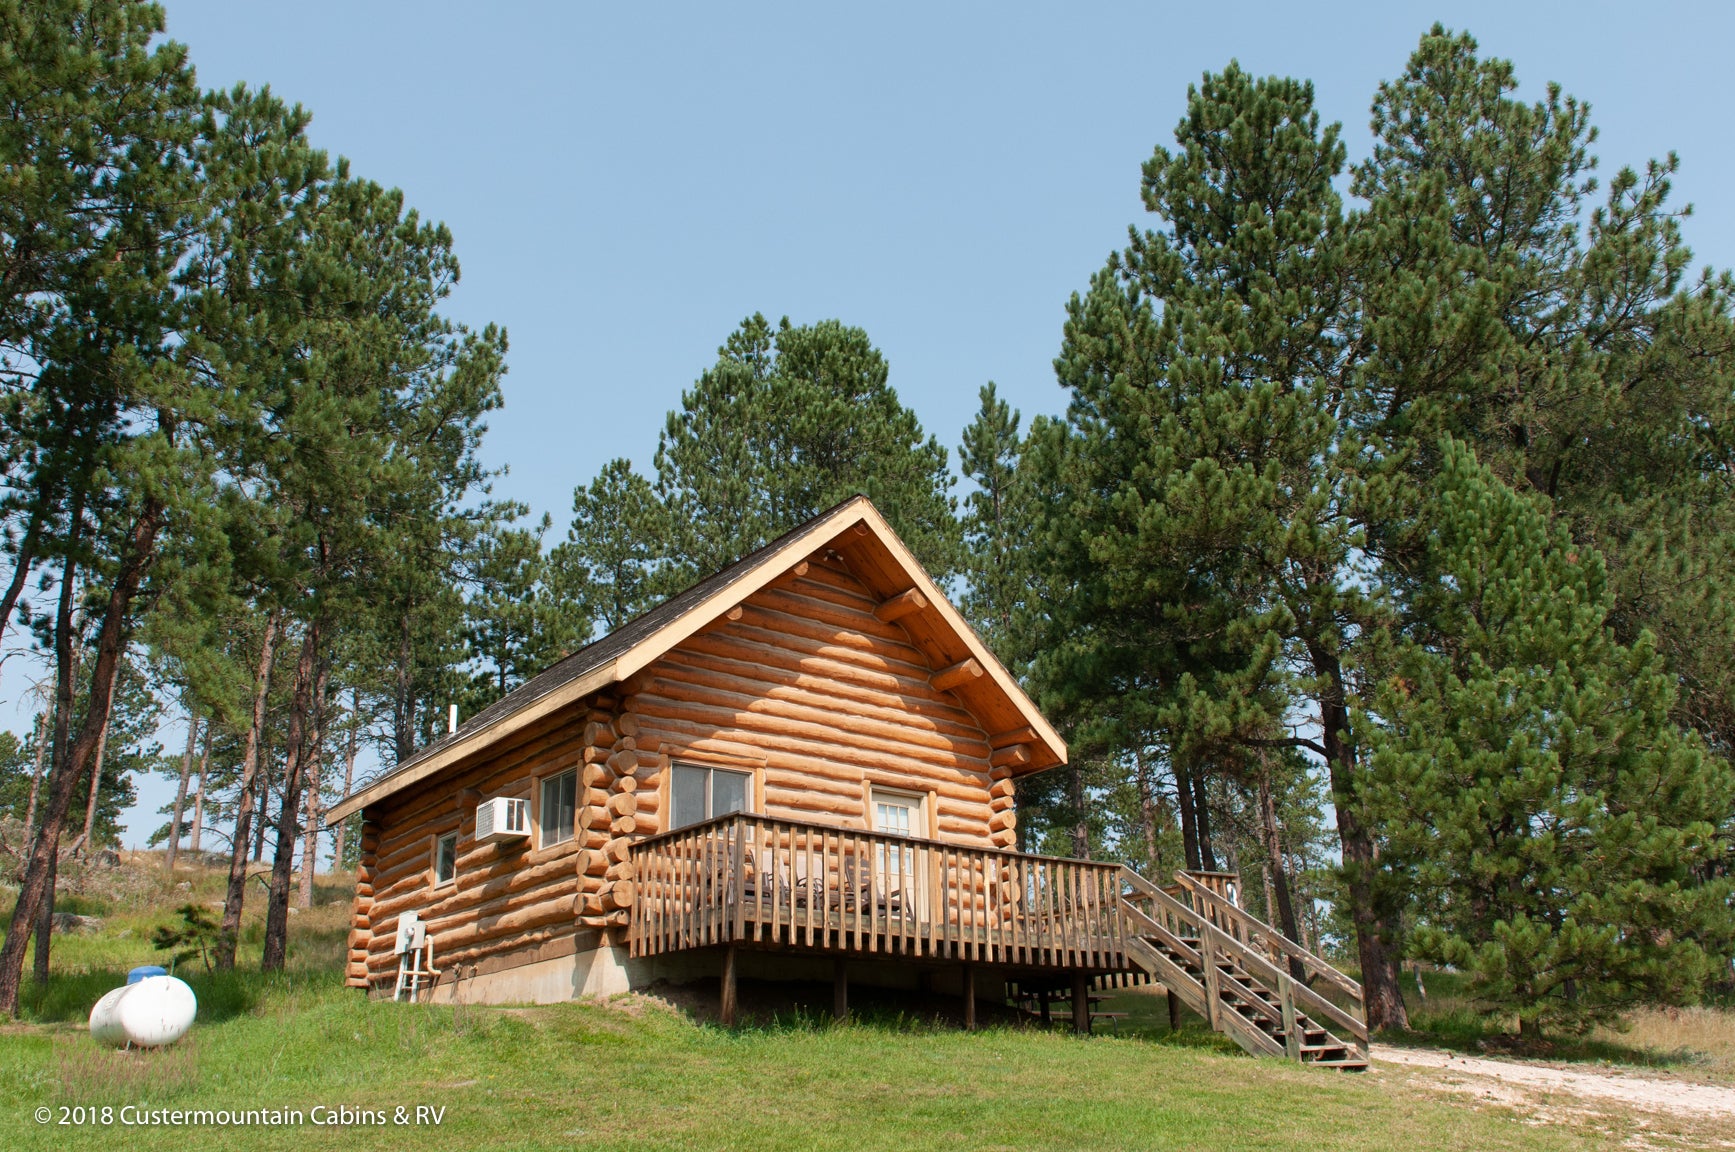 There is a cabin for almost any group size and price range.